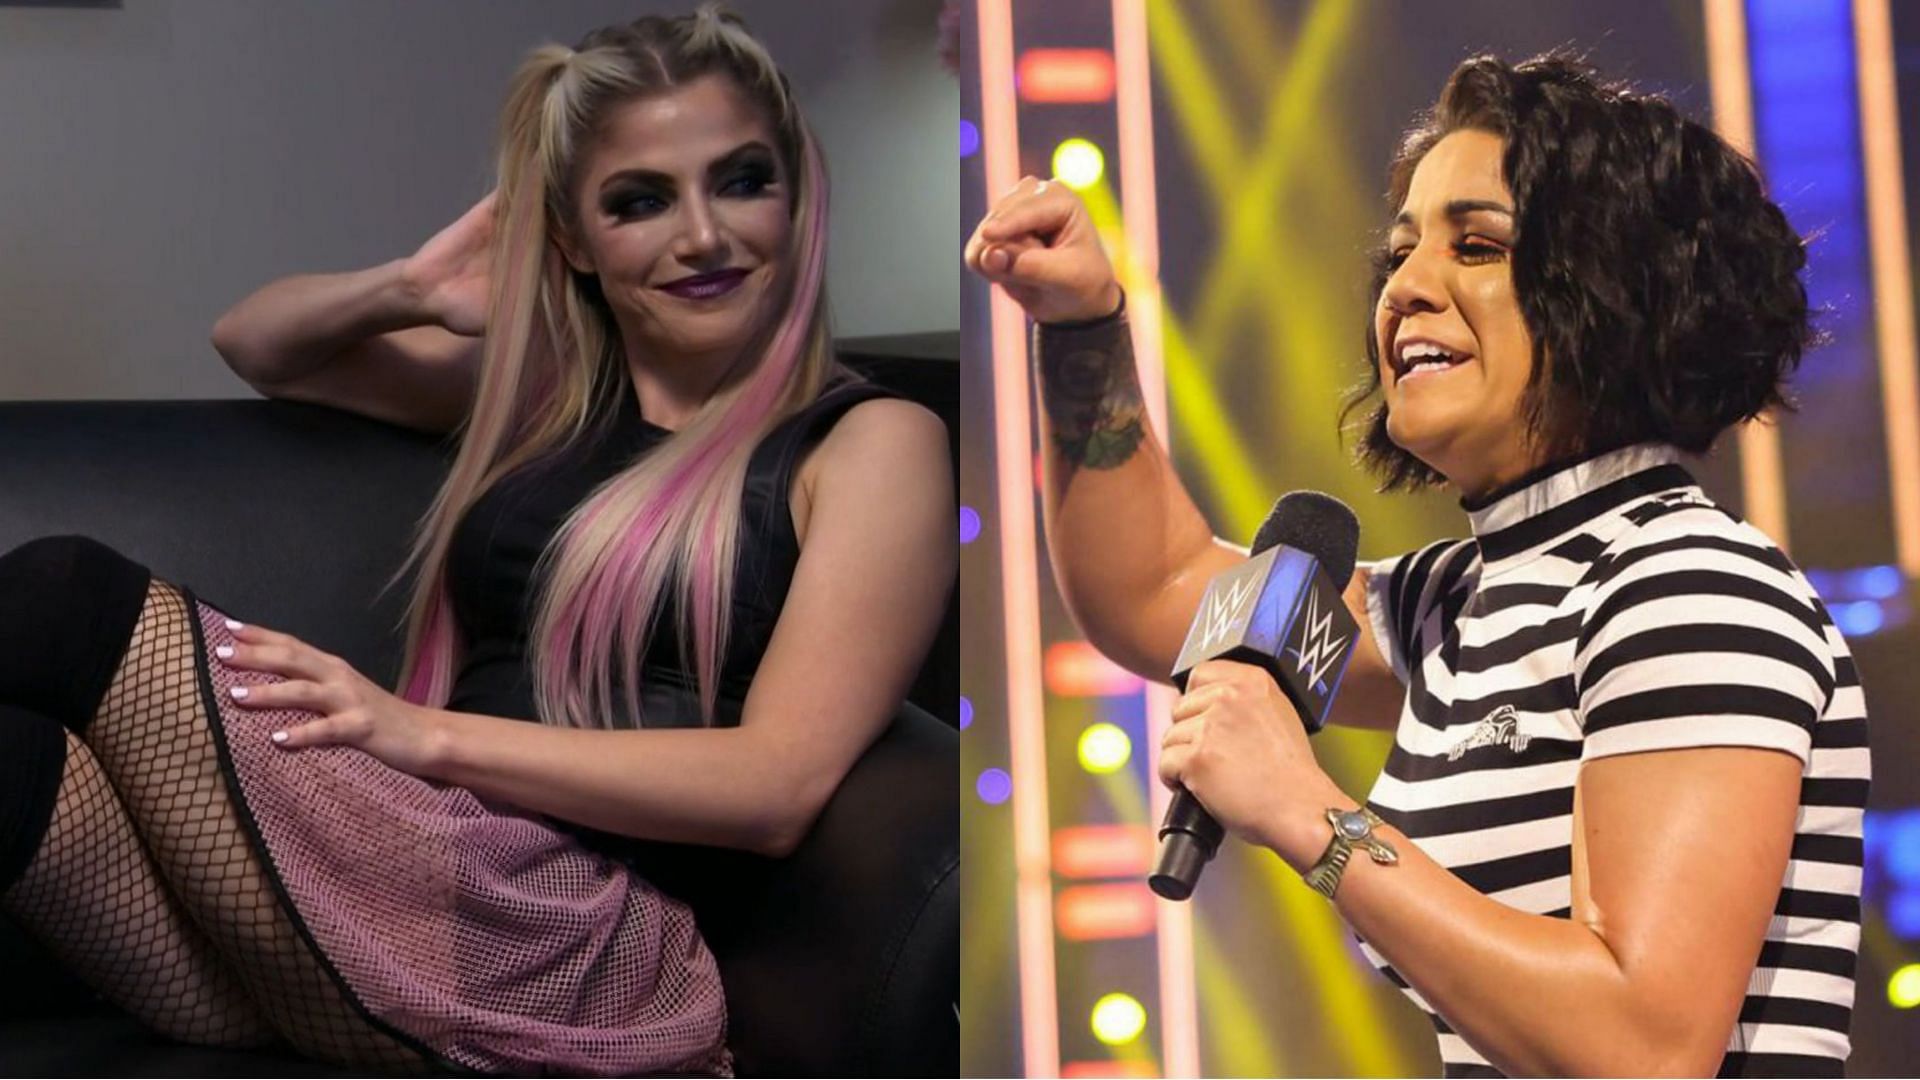 Will Alexa Bliss or Bayley enter the Elimination Chamber?